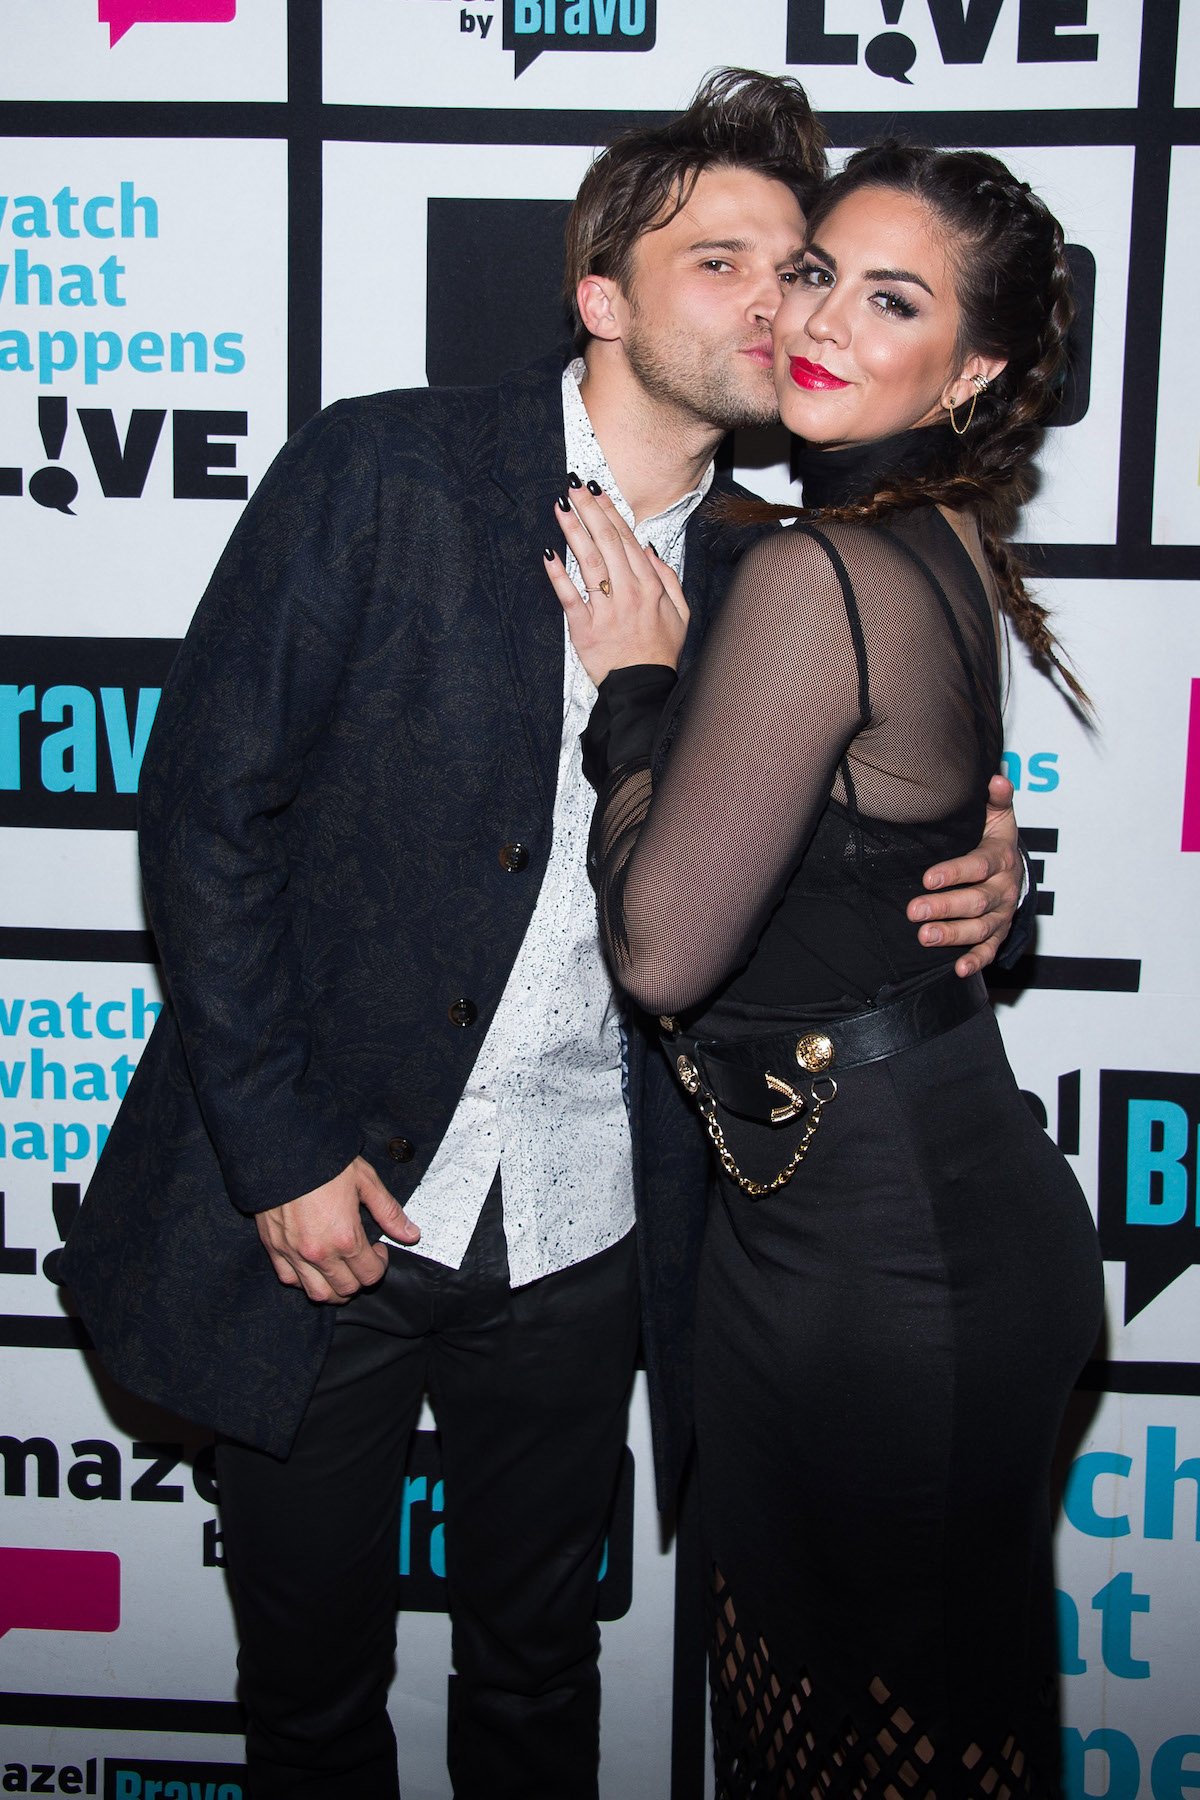 Tom Schwartz and Katie Maloney, wearing all black, get cozy at an event.